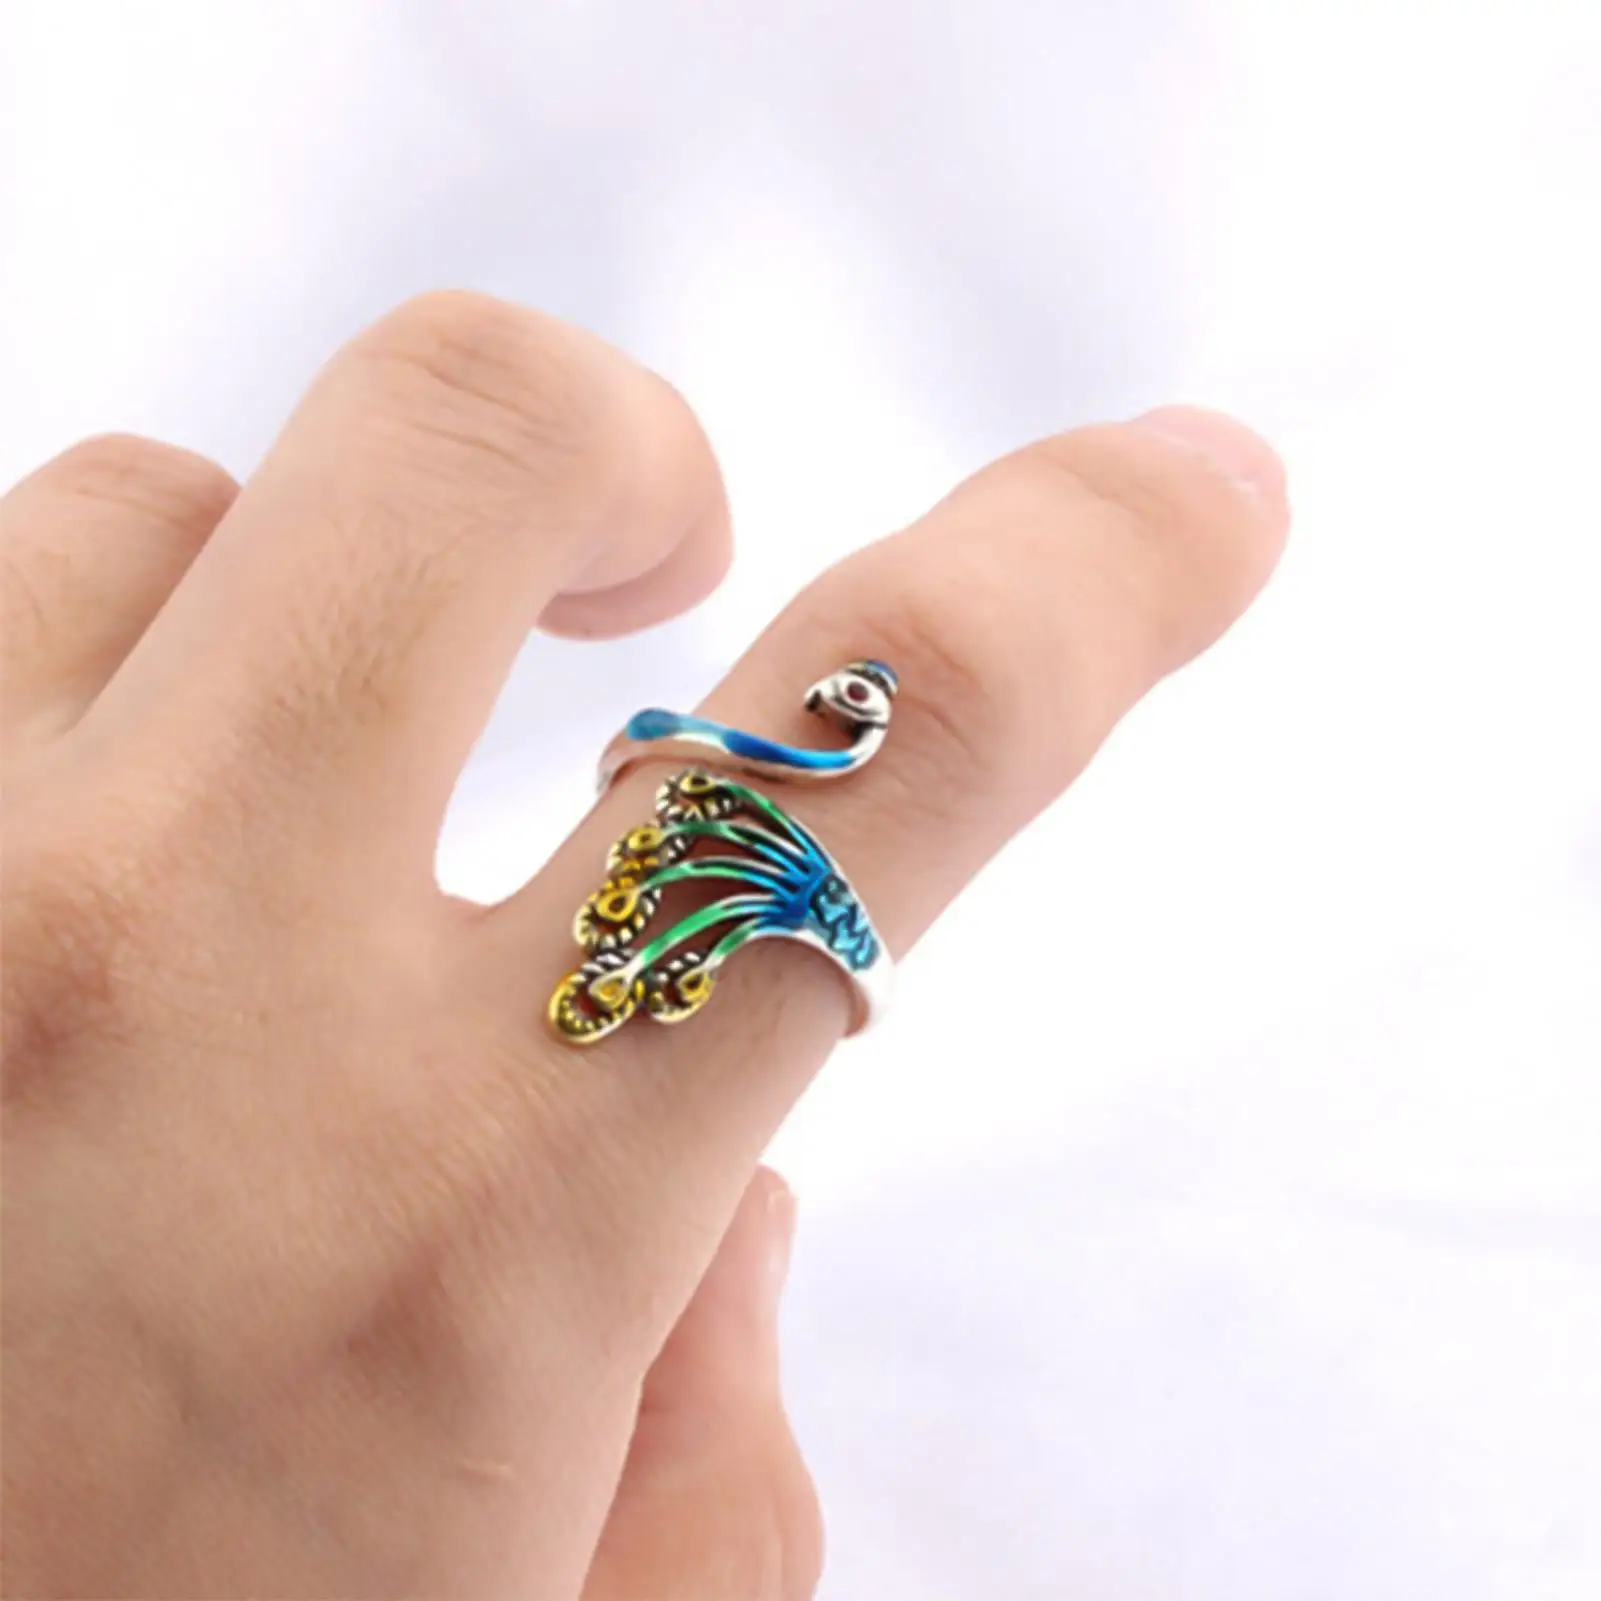 

Crochet Loop Peacock Design Adjustable Sewing Ring Wear Thimble Knitting Supplies for Household